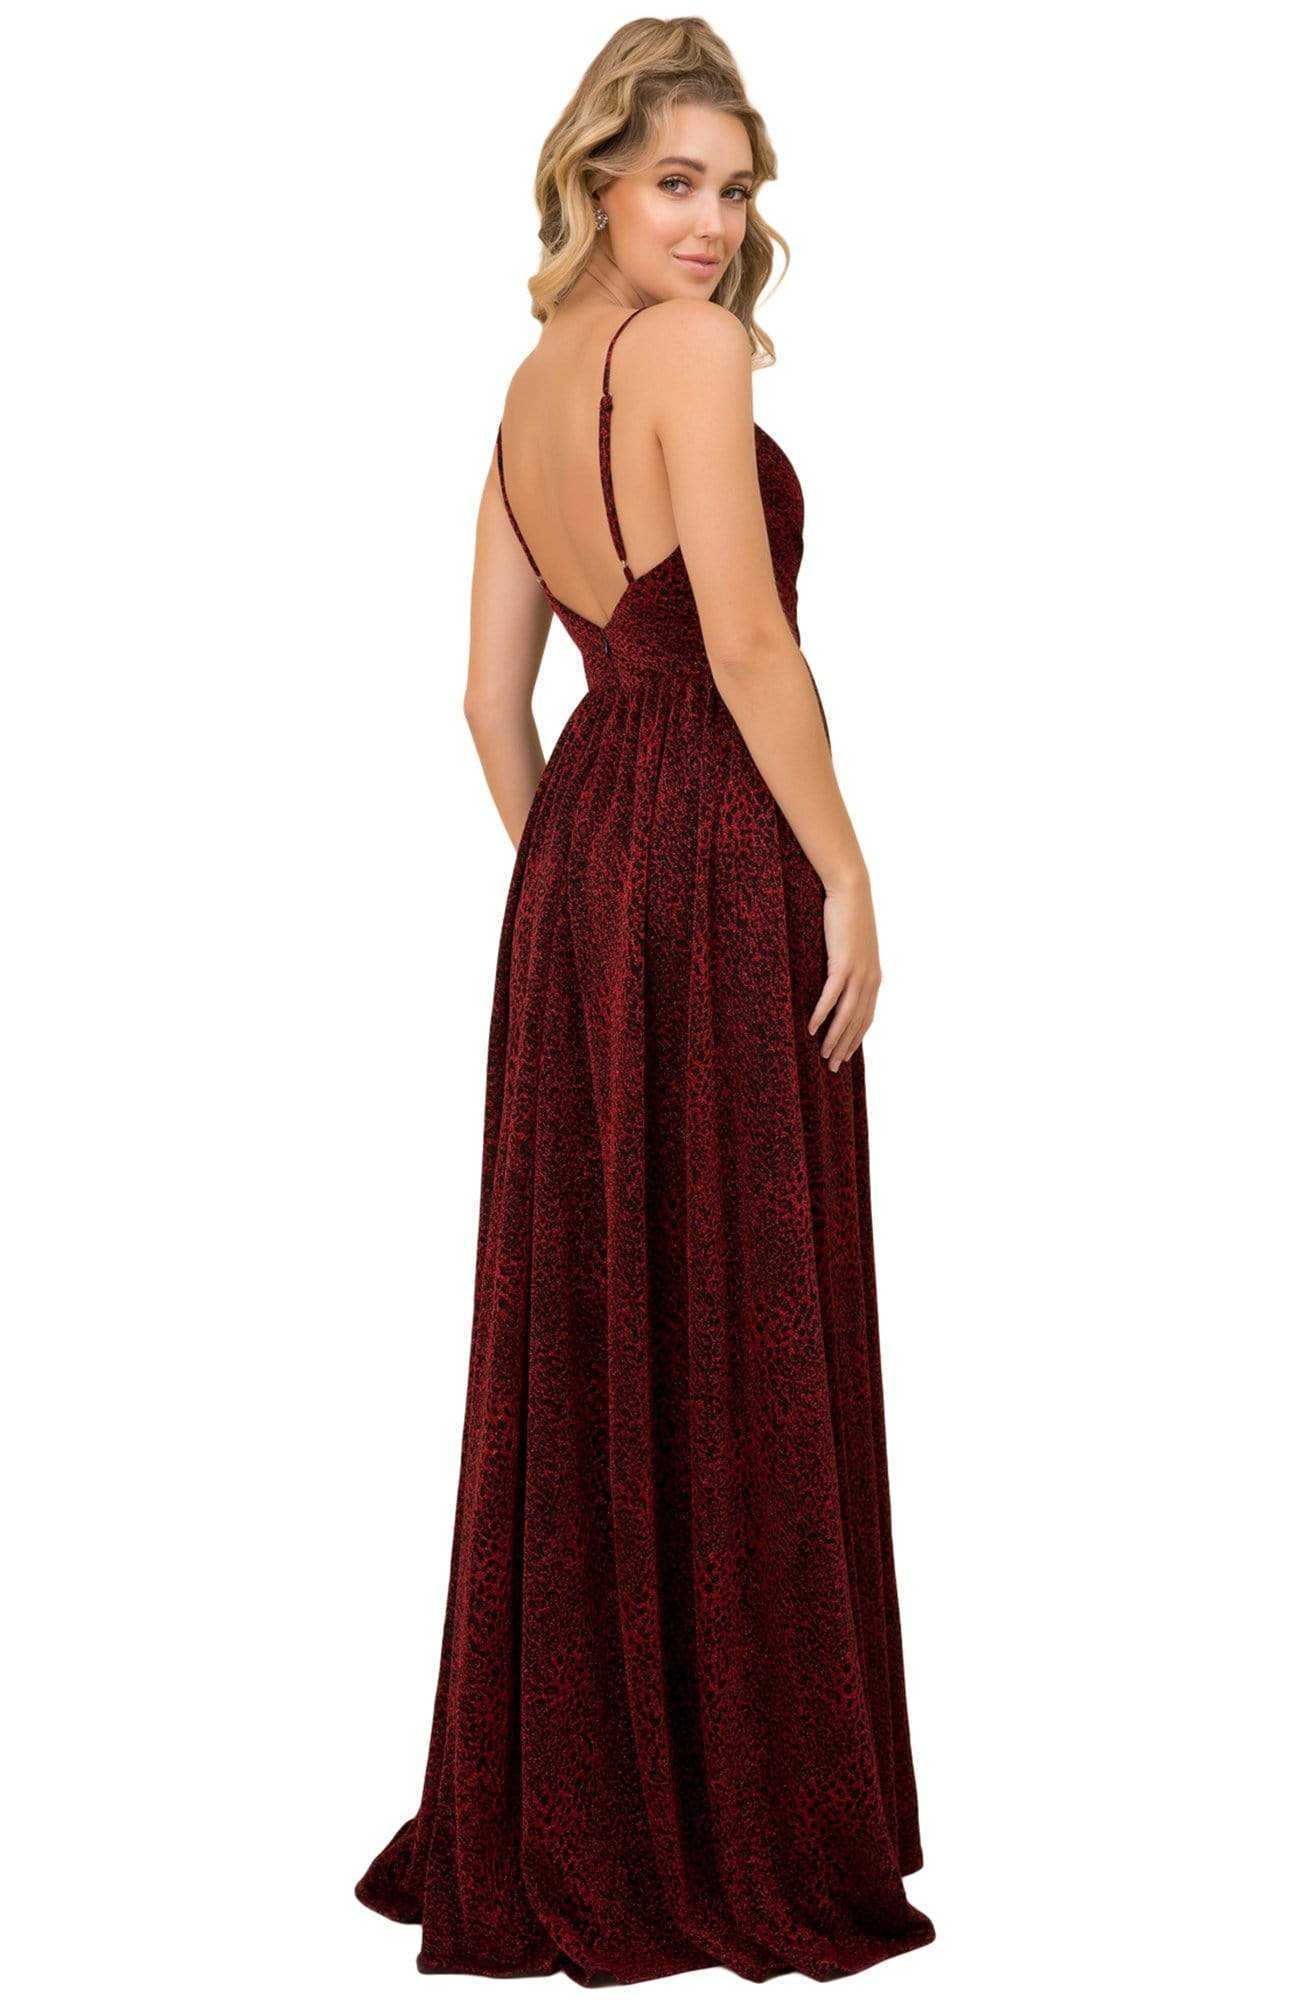 Nox Anabel, Nox Anabel - R356 V Neck Animal Printed High Slit A-Line Evening Gown